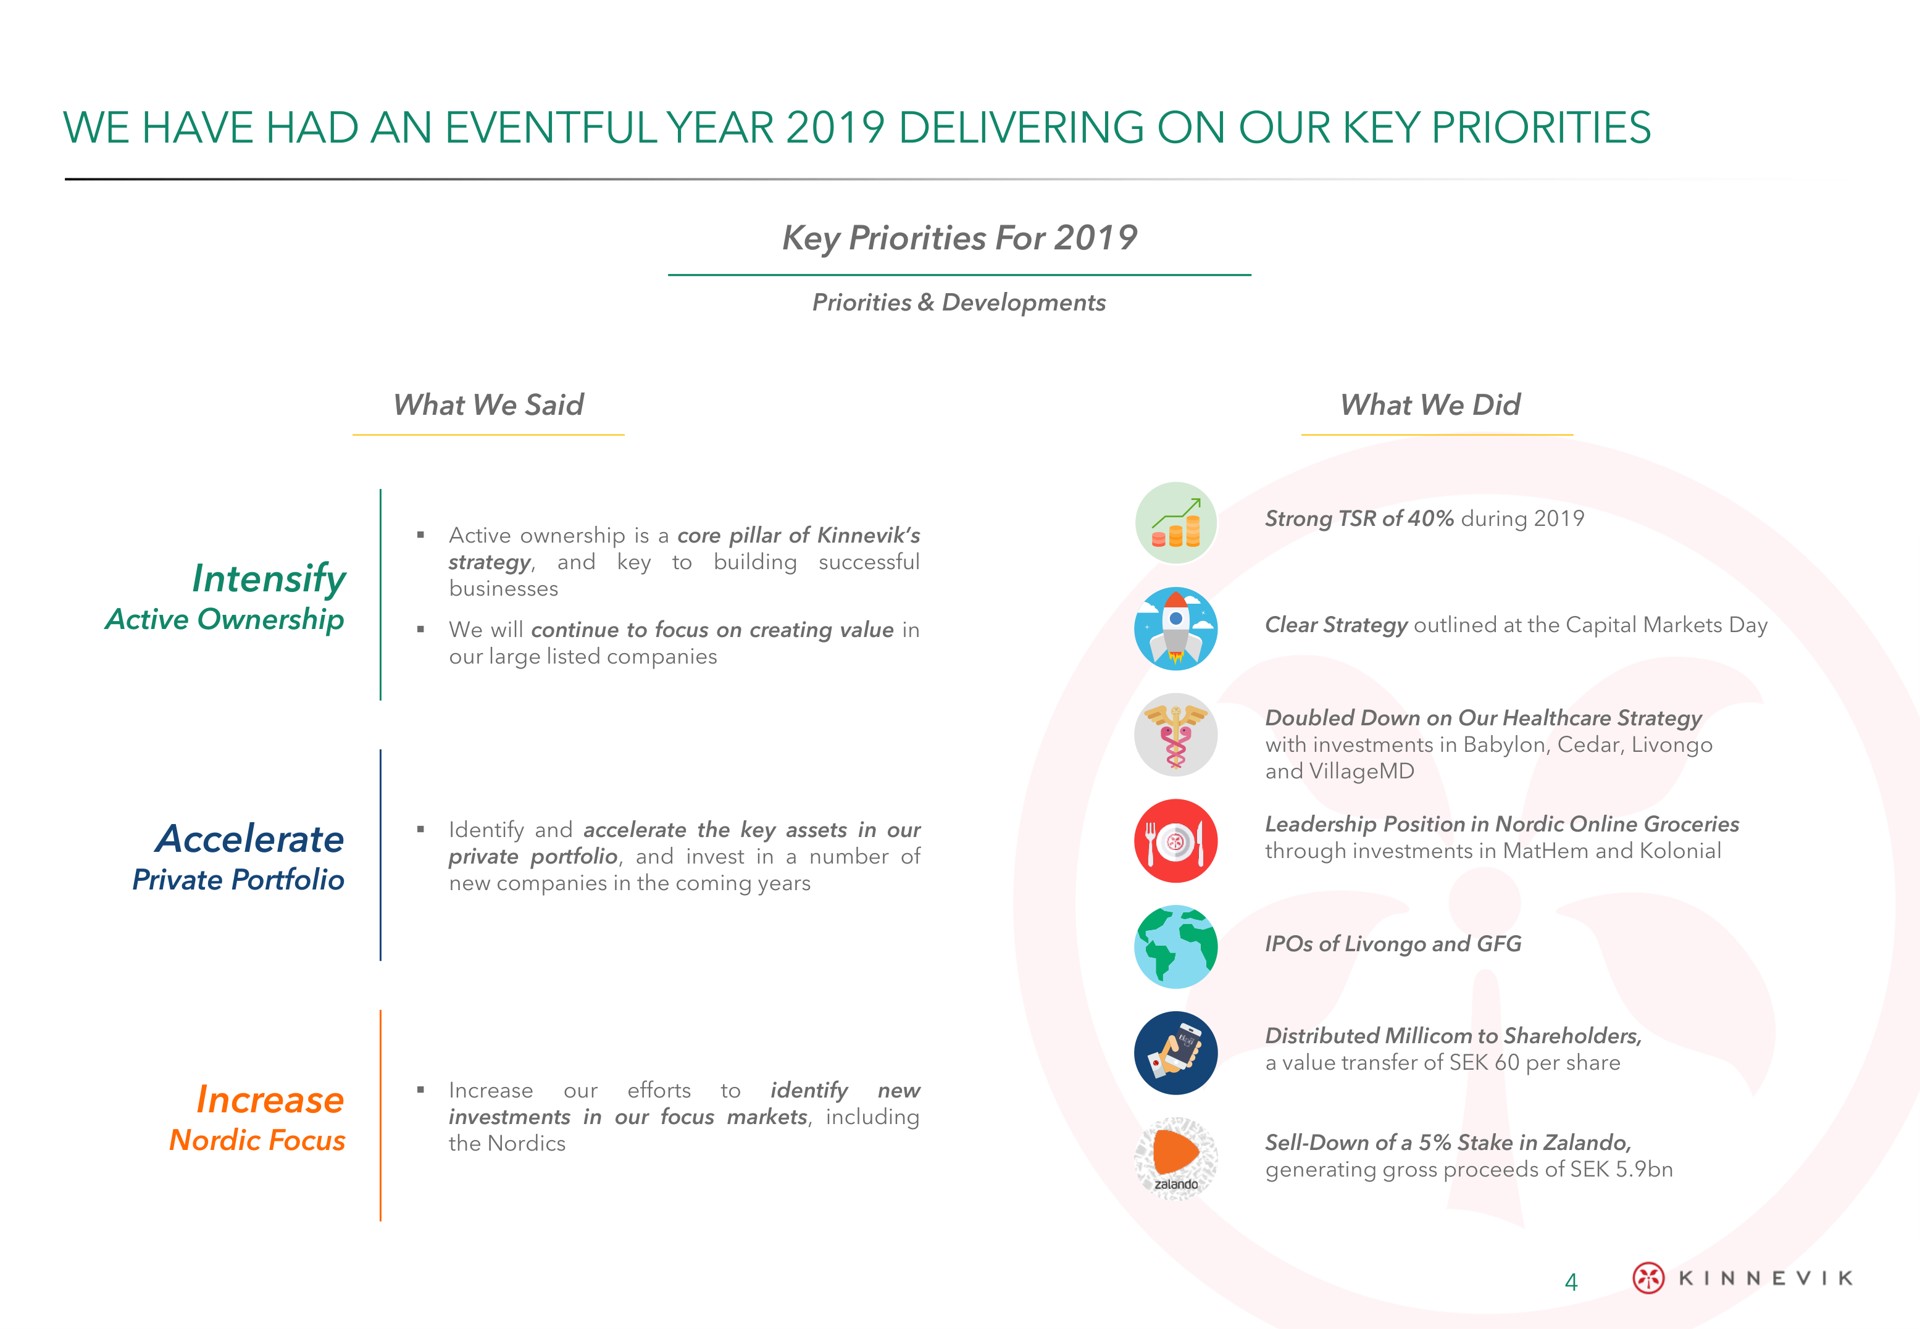 we have had an eventful year delivering on our key priorities | Kinnevik